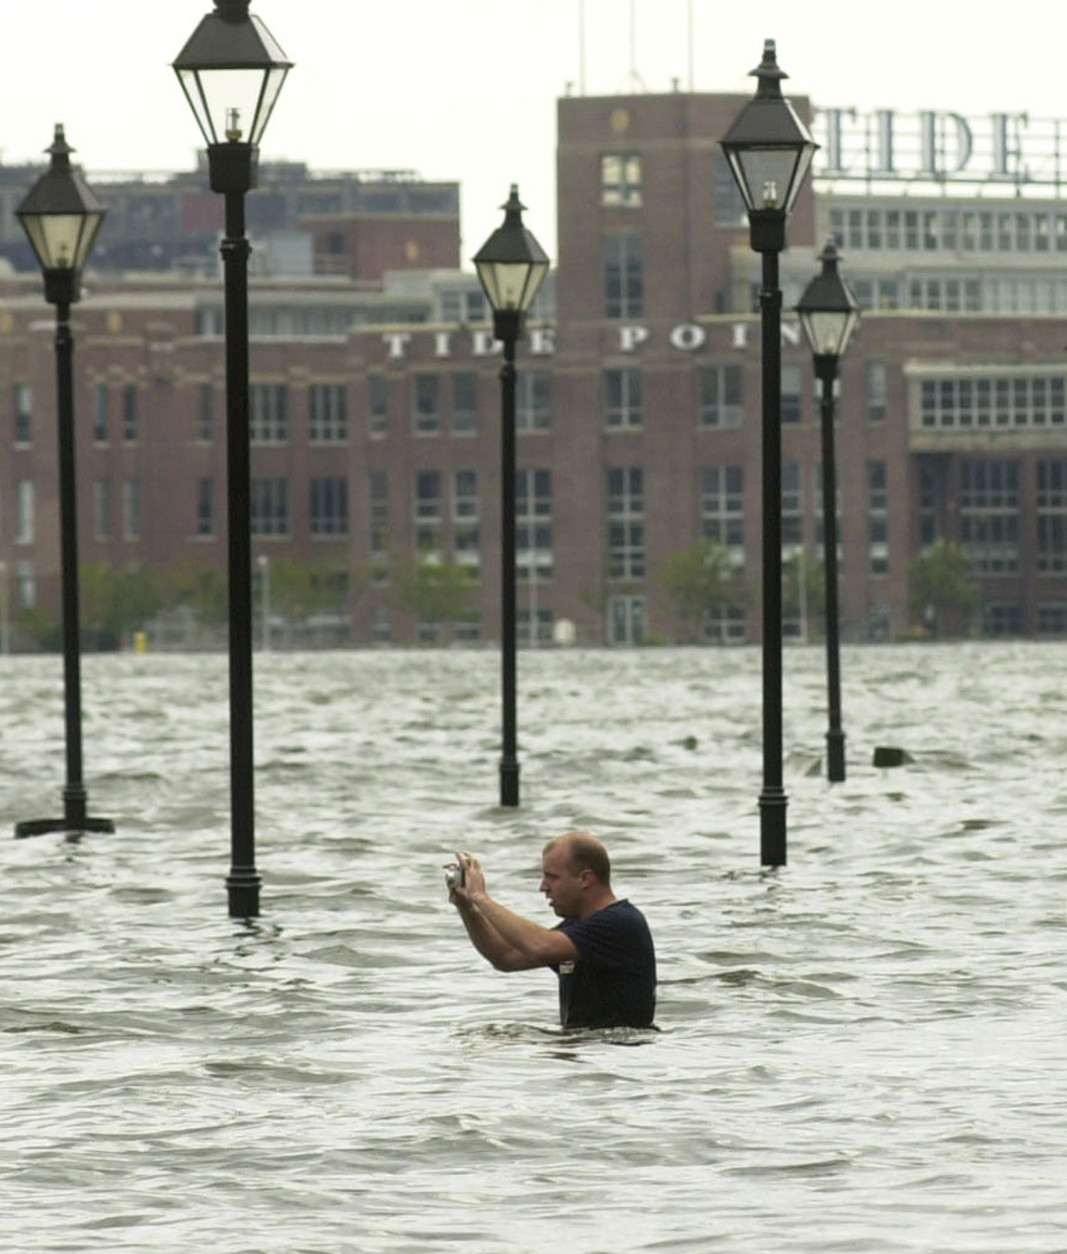 **TRANSMITTED AS AN ALTERNATE CROP**The tide is certainly in,  as a man in flood waters over his waist takes photographs of the flooding in Baltimore's Fells Point Friday, Sept. 19, 2003, where Hurricane Isabel caused much of the city's downtown area to flood. In the background is Tide Point, an office complex.(AP Photo/ Steve Ruark)